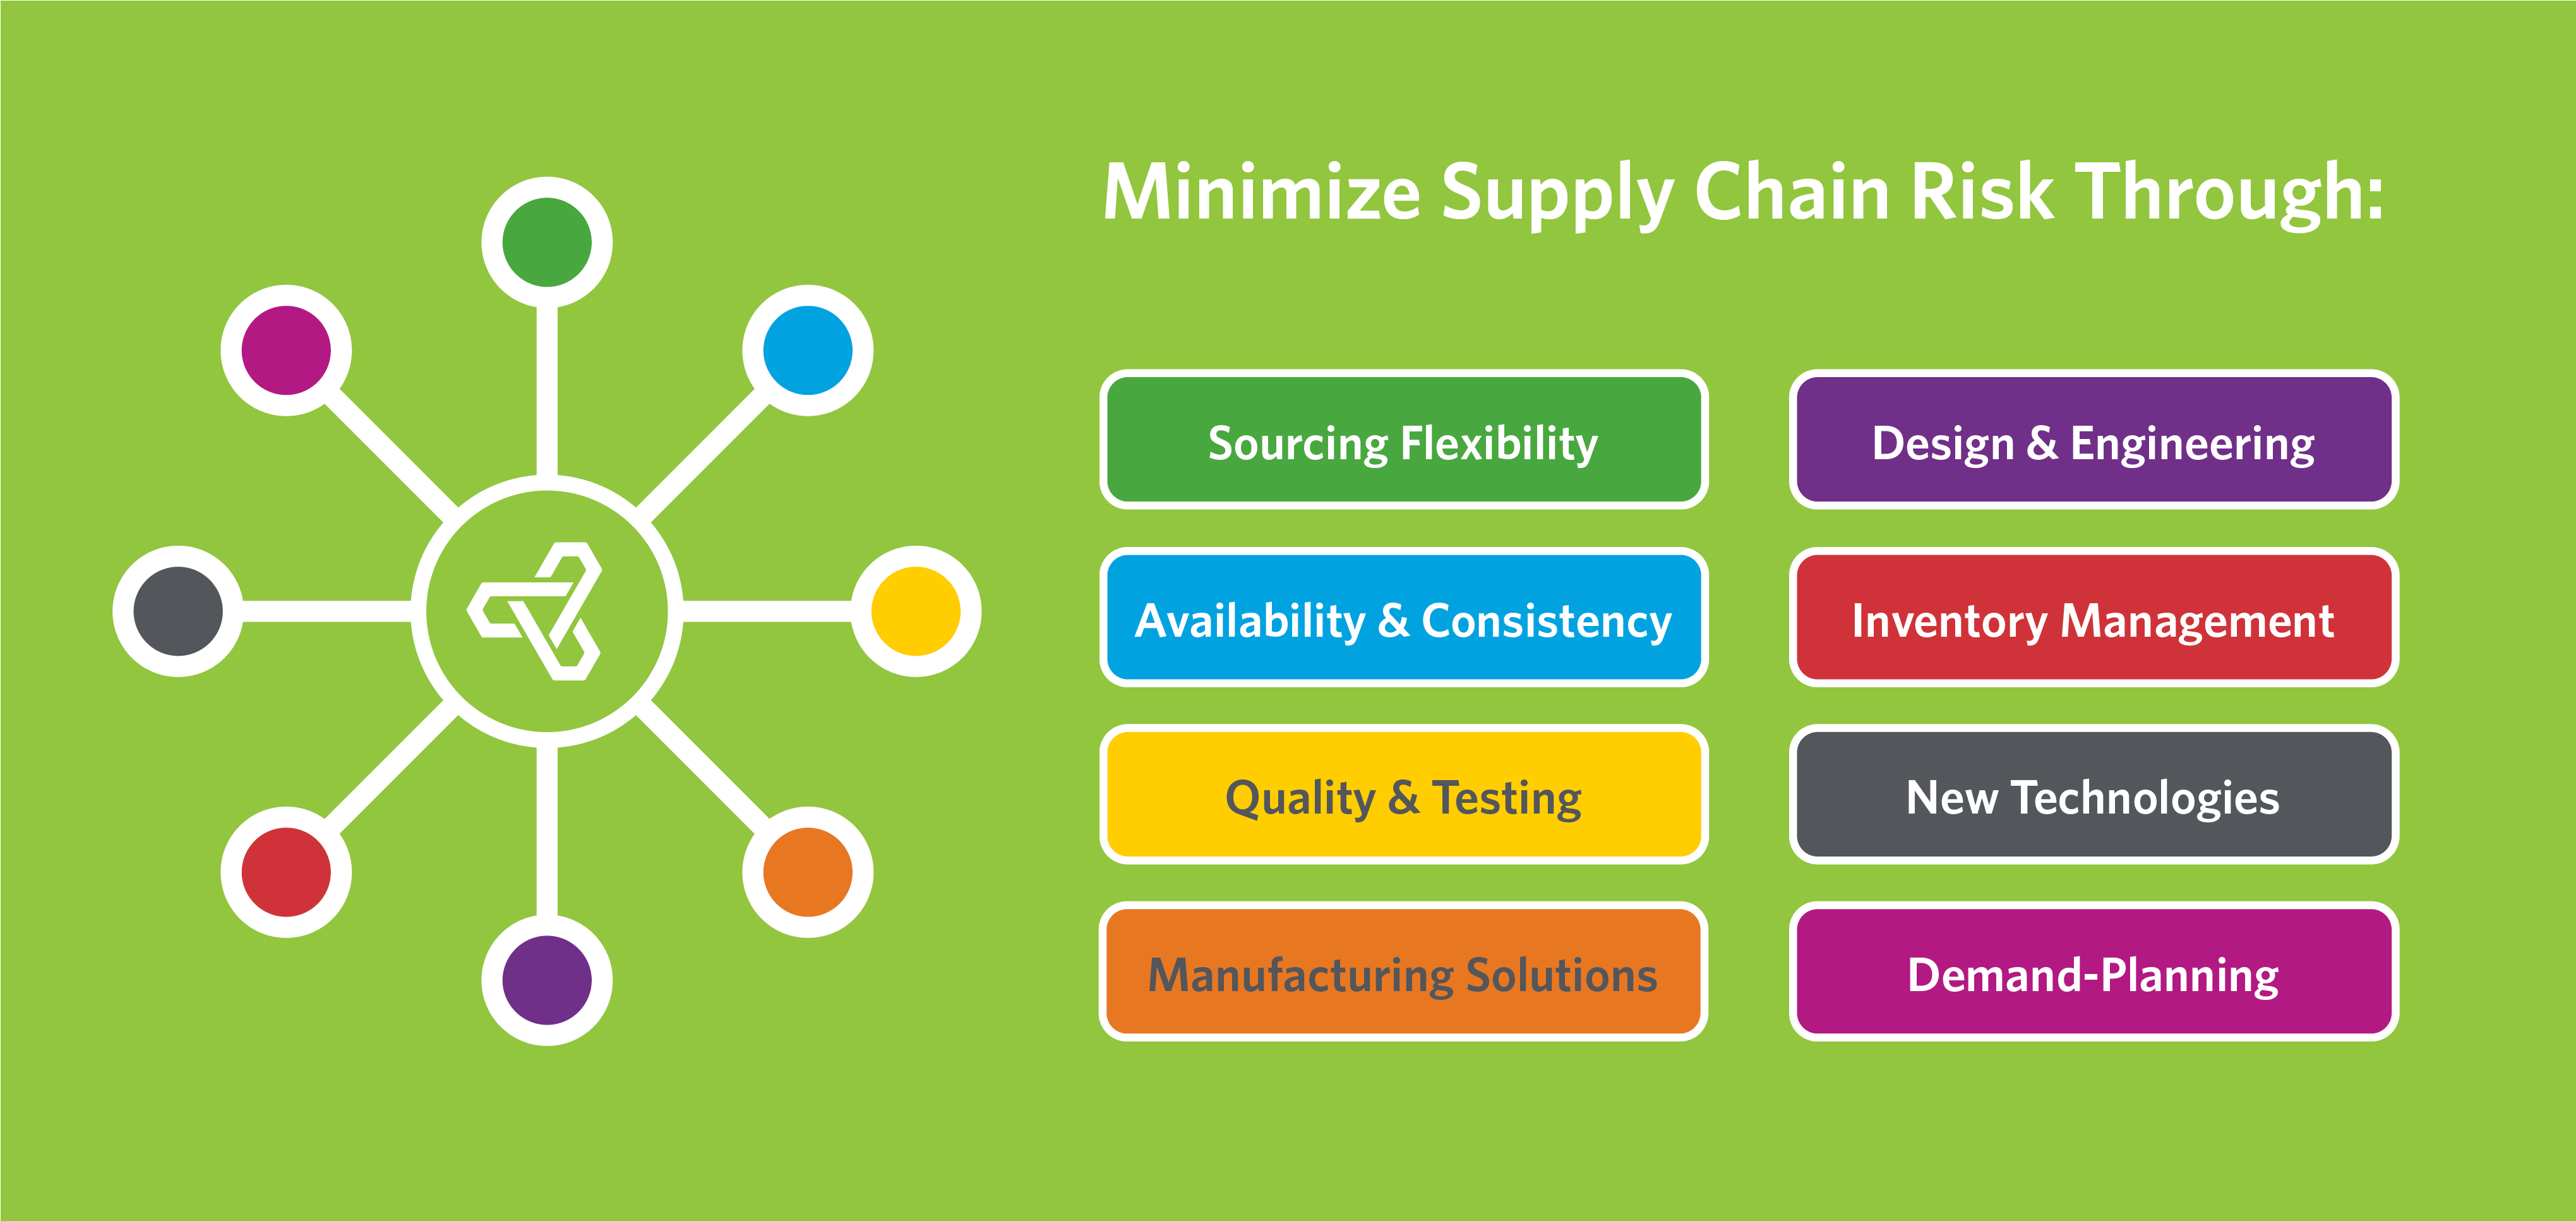 Minimize Supply Chain Risk In These Main Categories